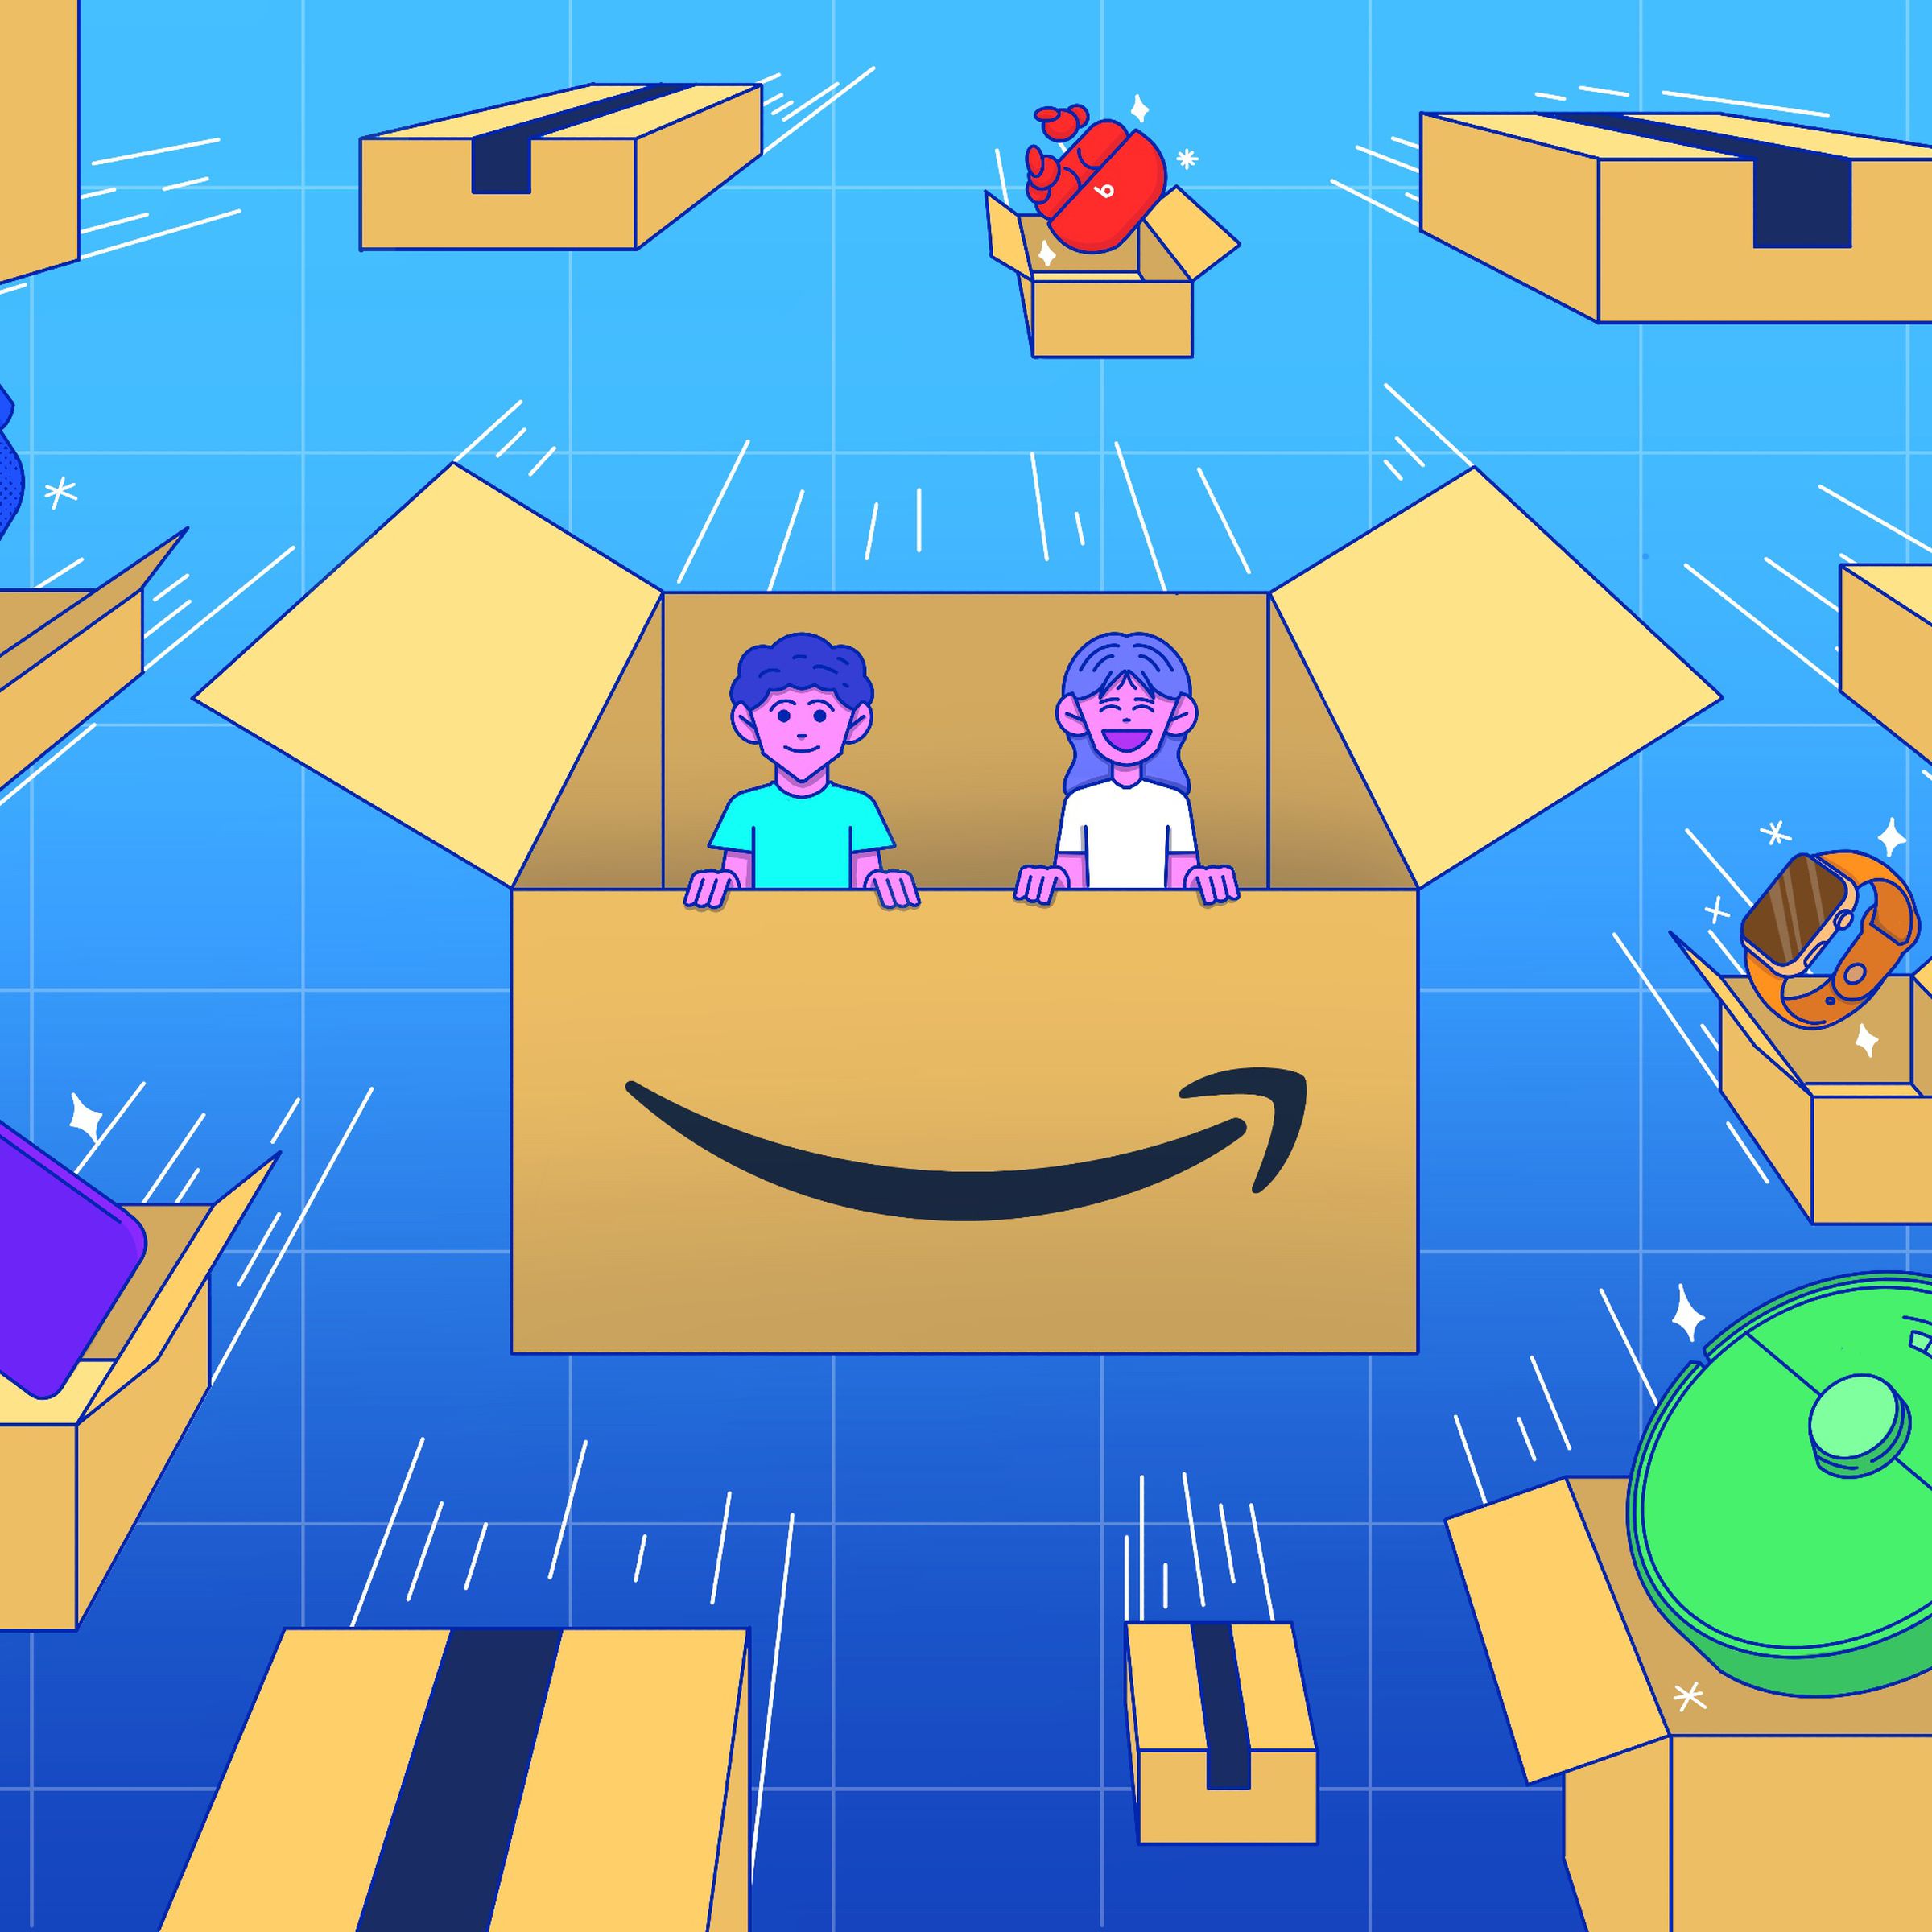 An illustration of two people flying in a giant Amazon package, surrounded by a fleet of similar boxes carrying stylized tech gadgets.